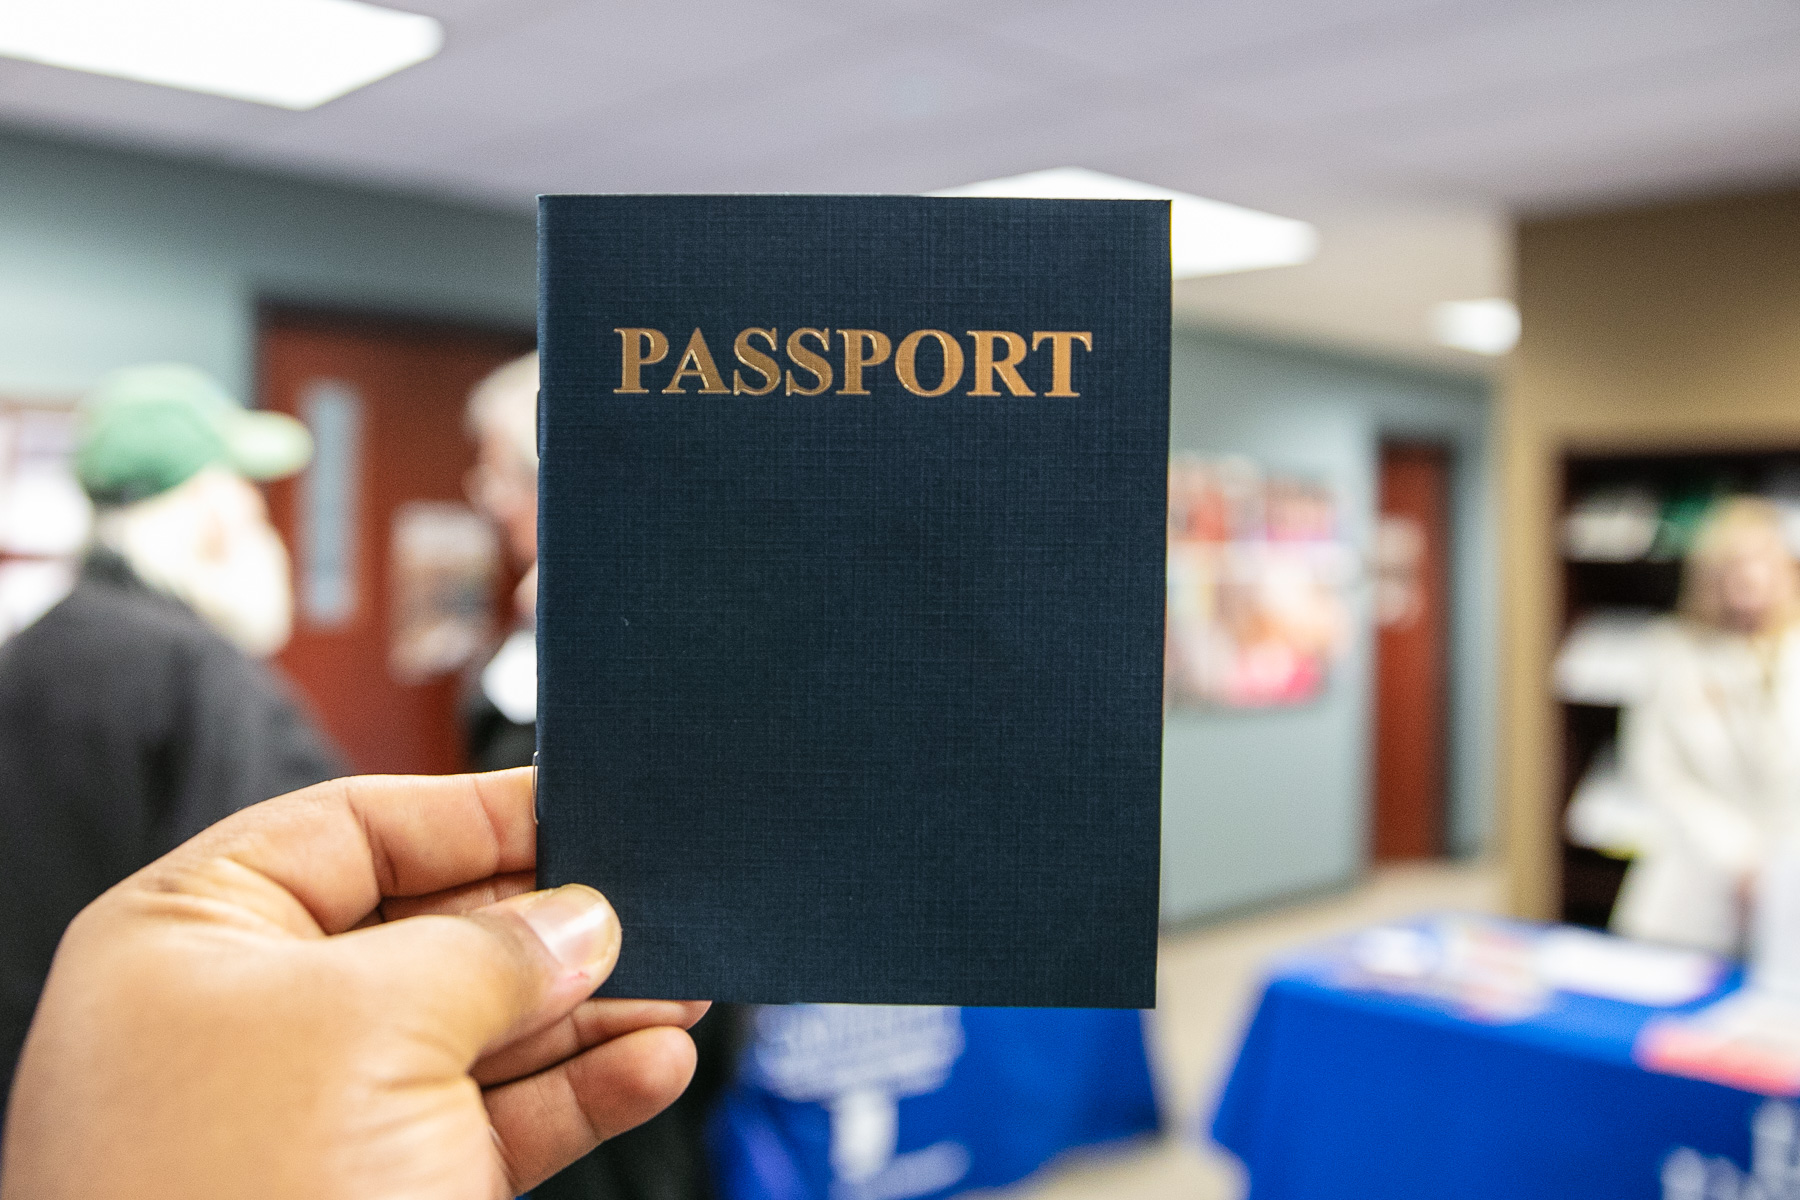 Attendees received a passport, indicating that they have completed learning about resources provided at the School of Continuing and Professional Studies. Participants received a reward after their visit. (DePaul University/Randall Spriggs)